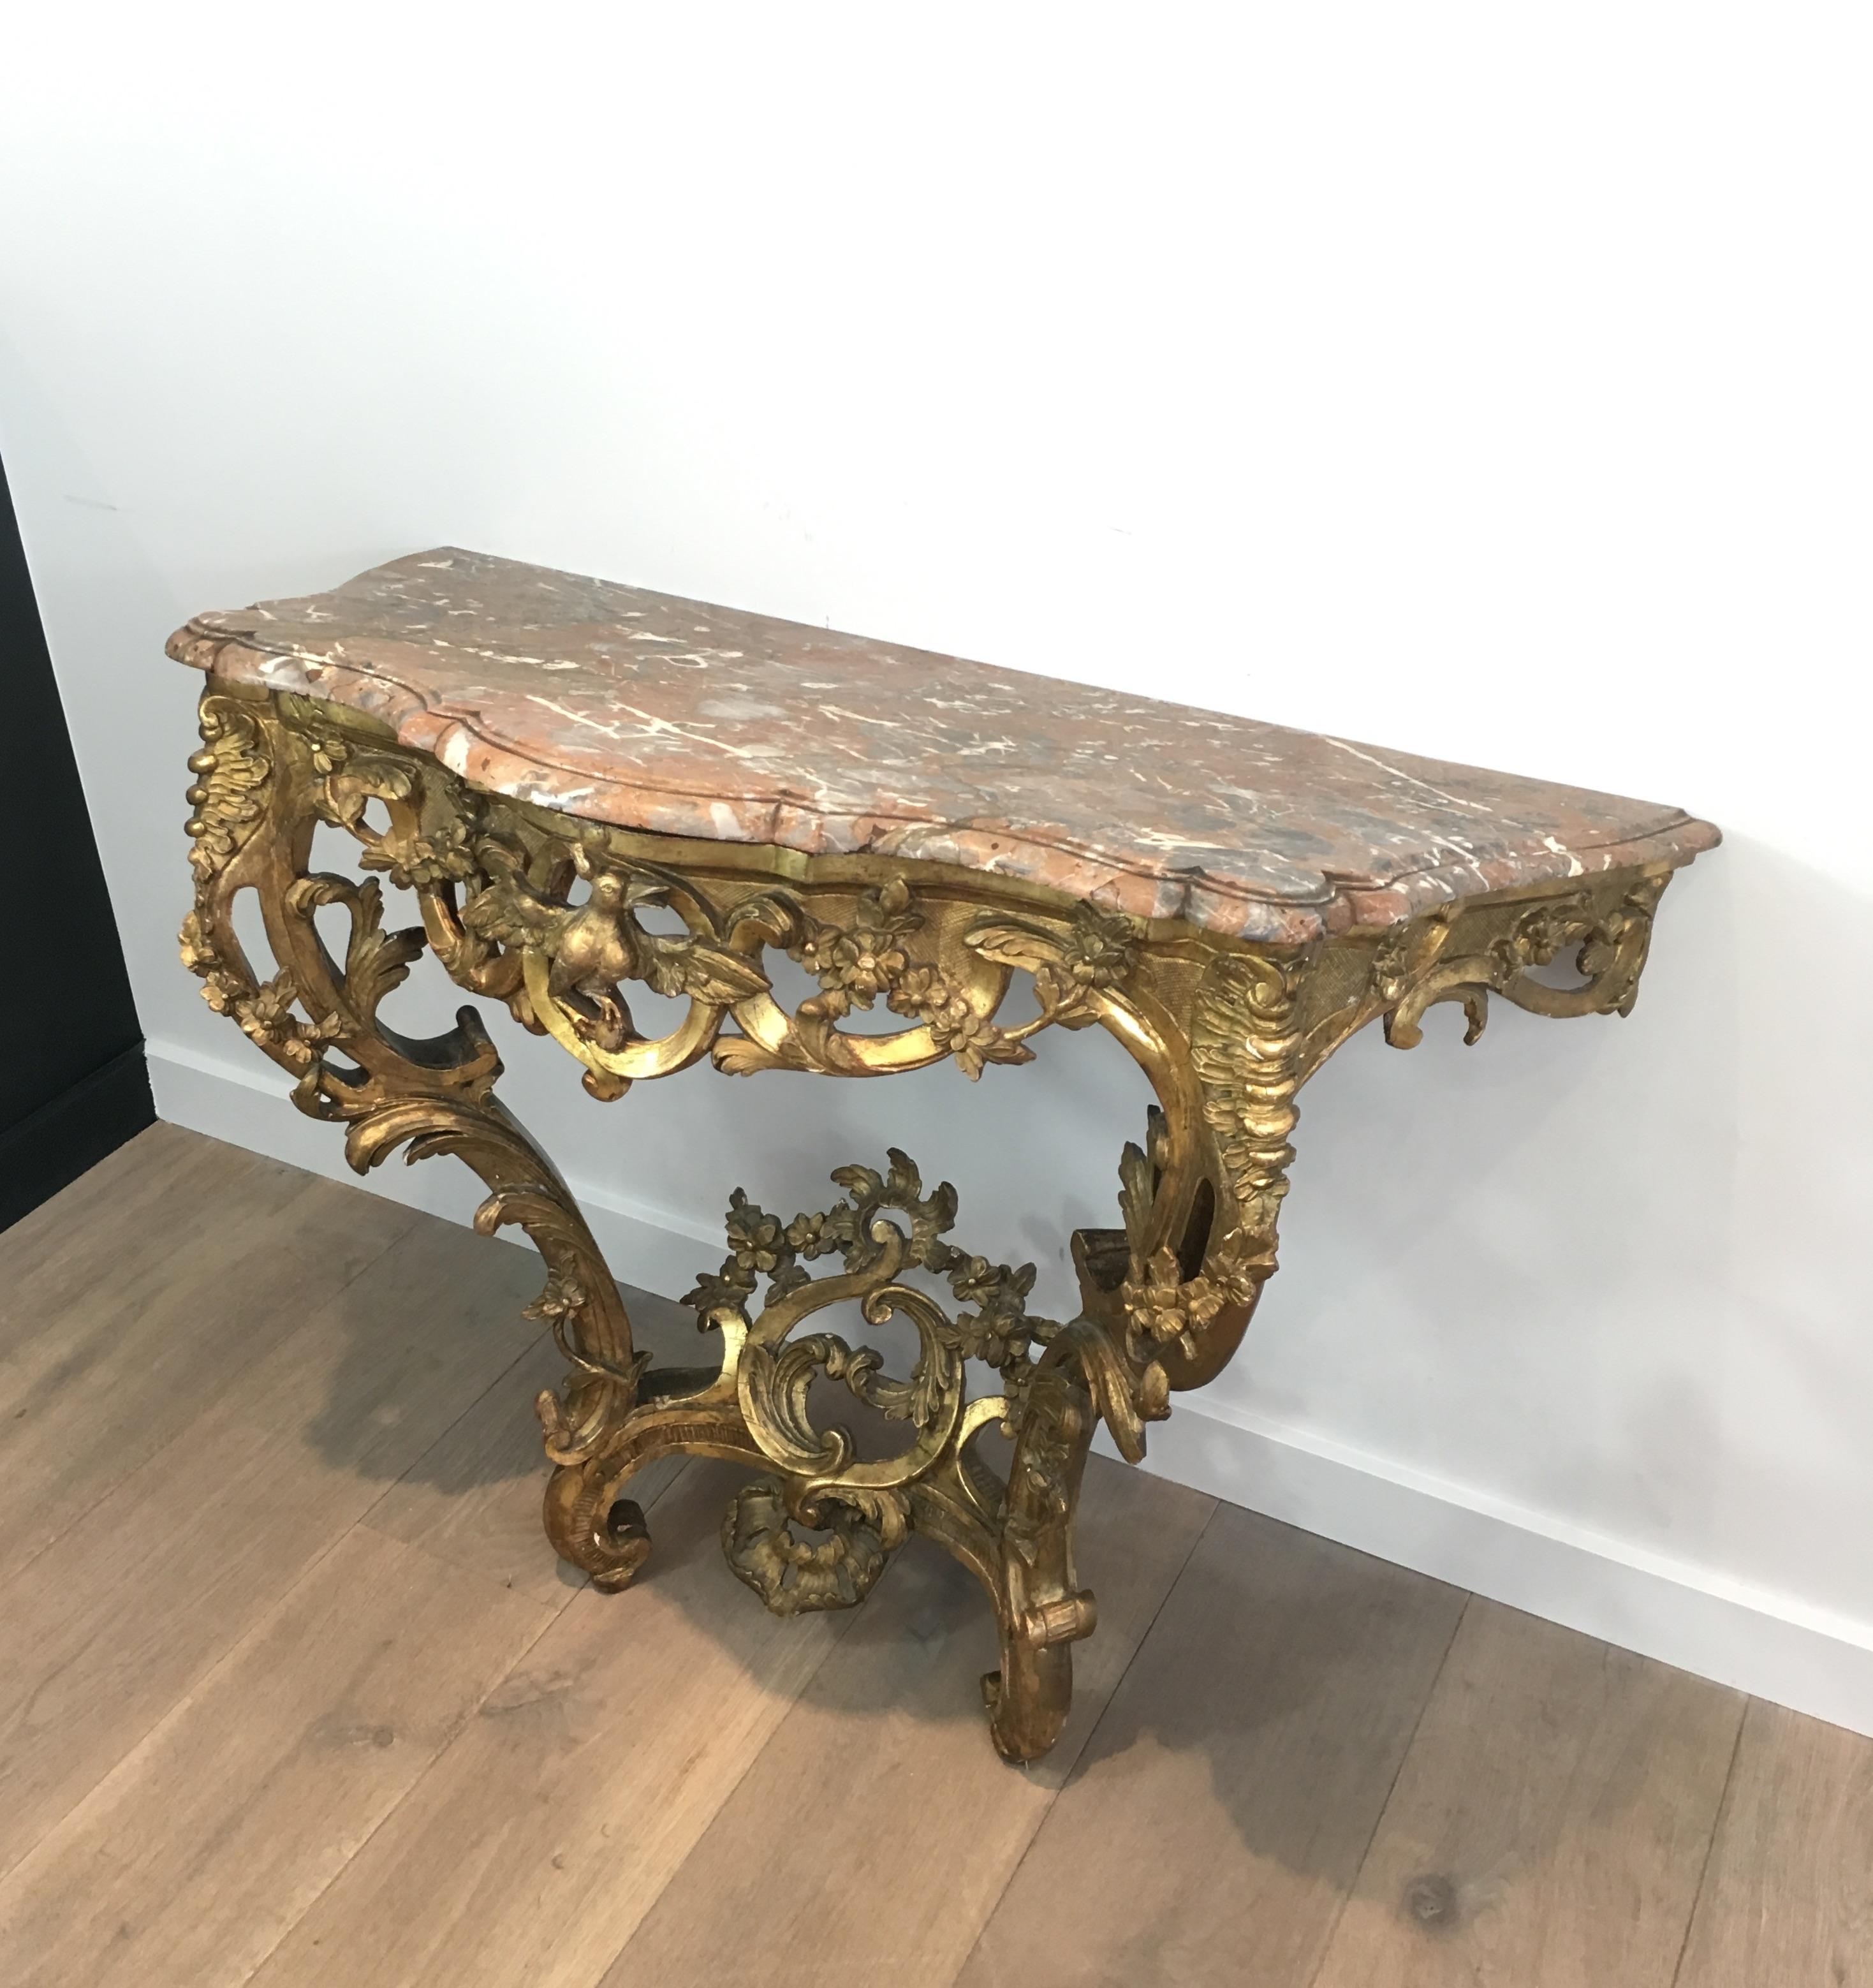 French 18th Century Giltwood Console Table with Red Marble Top, Louis XV Period For Sale 15